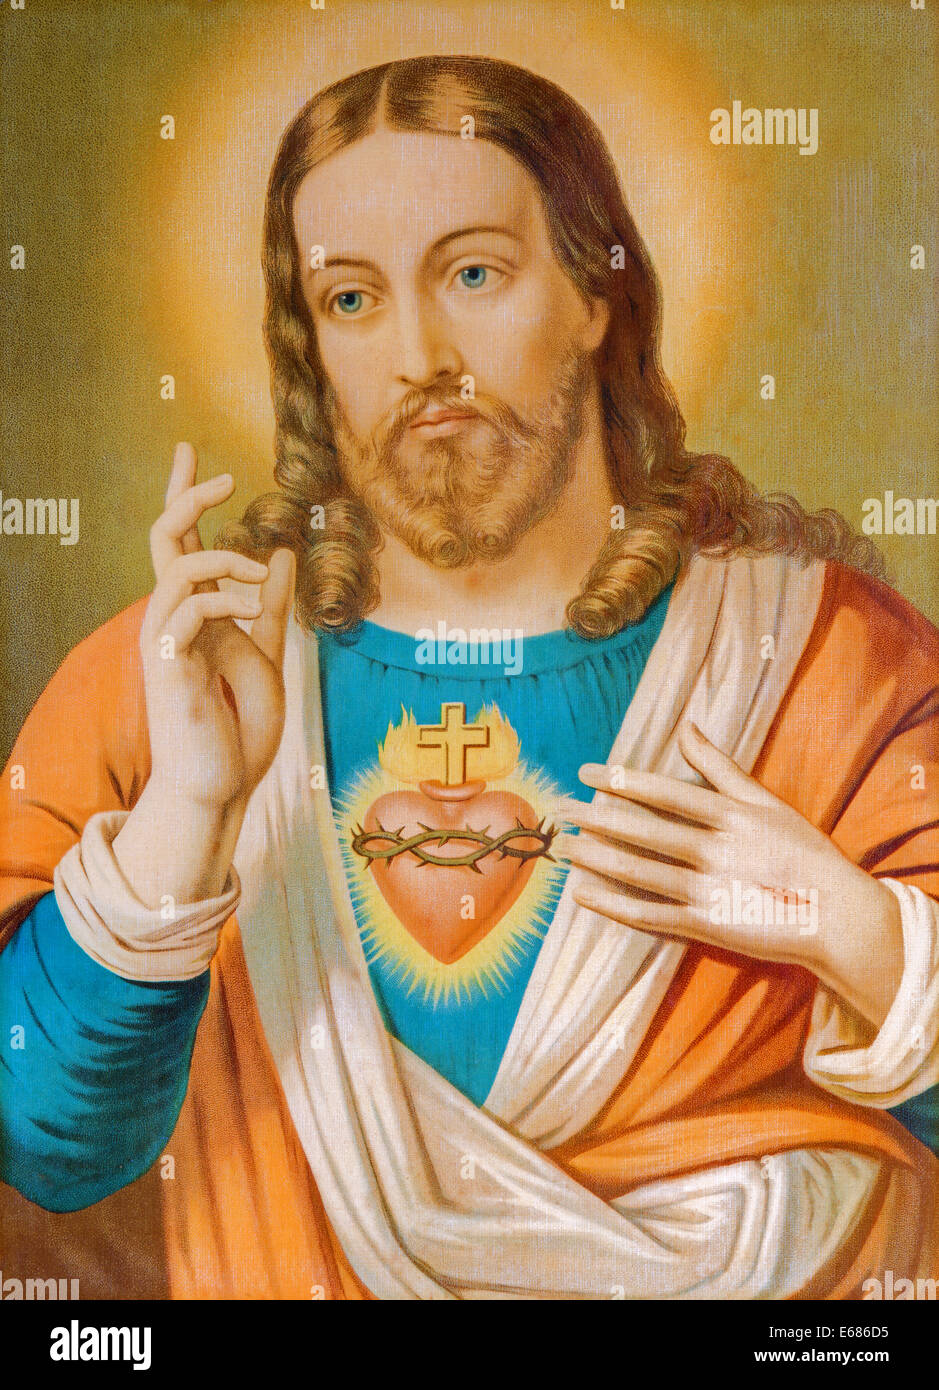 SEBECHLEBY, SLOVAKIA - JULY 30, 2014: Copy of typical catholic image of heart of Jesus Christ from Slovakia printed in 19. cent. Stock Photo